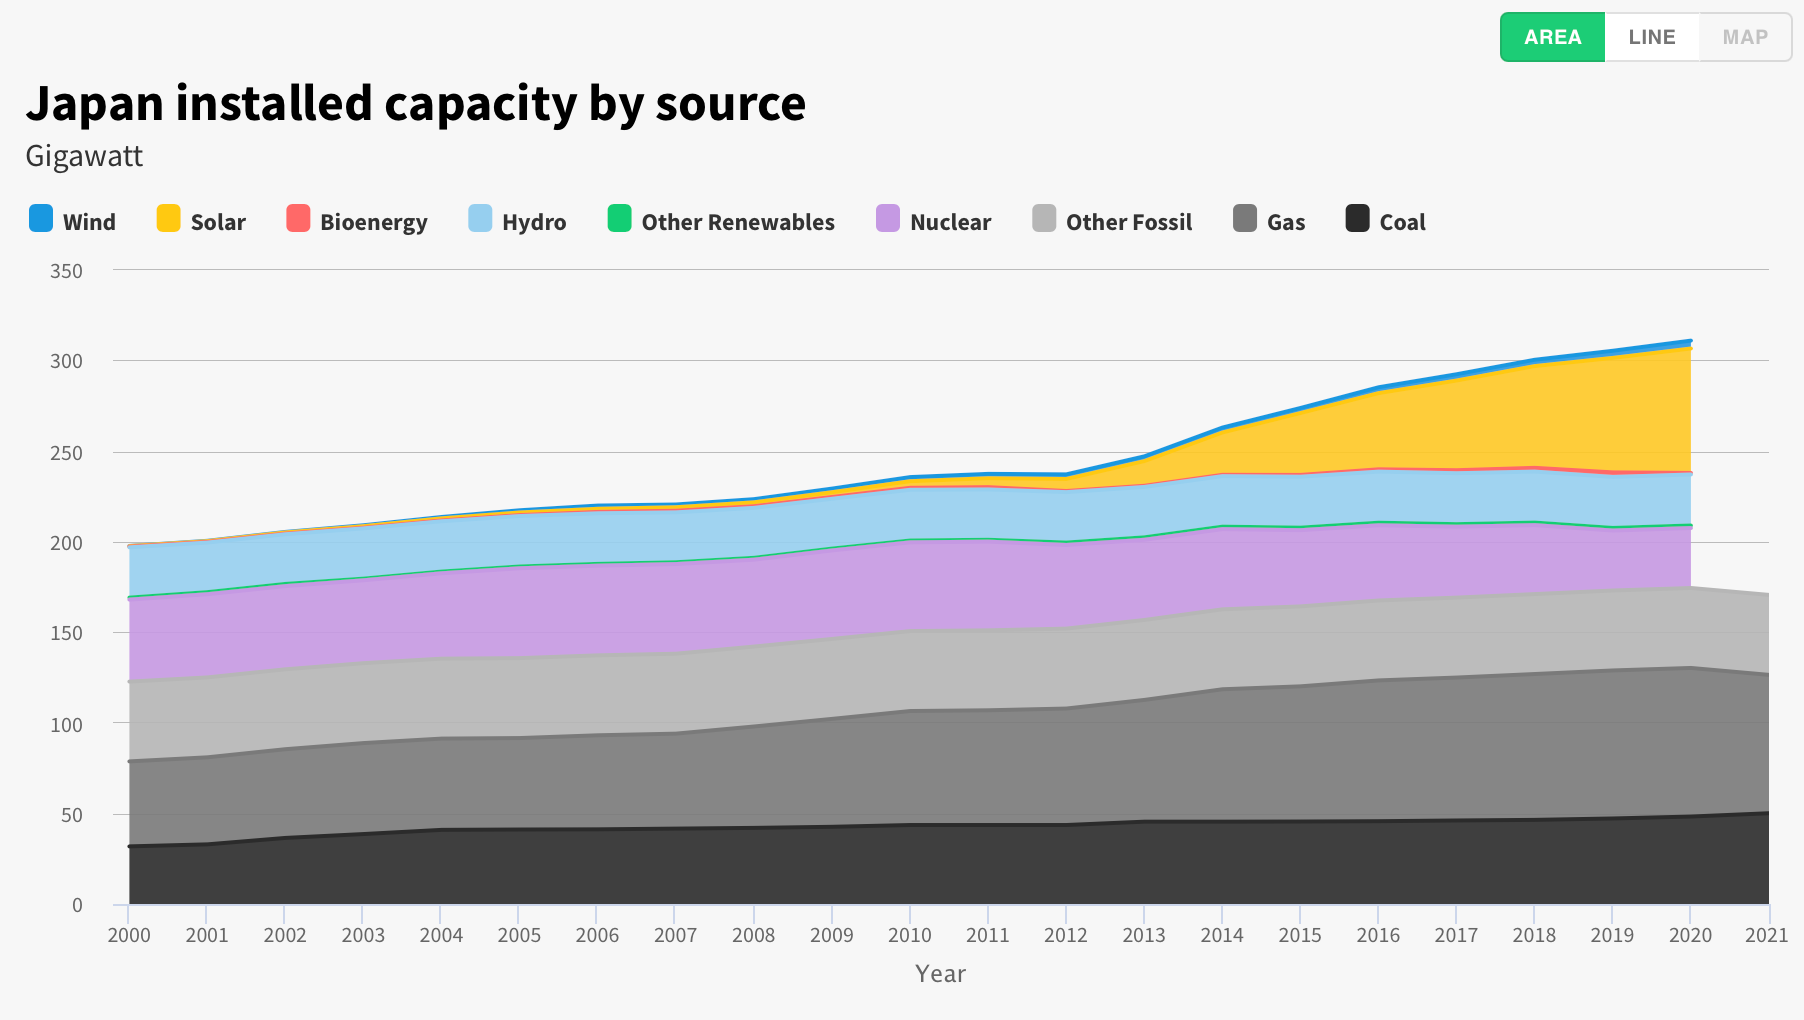 An area chart of Japan installed capacity by source showing wind and solar increasing rapidly from 2011 onwards.